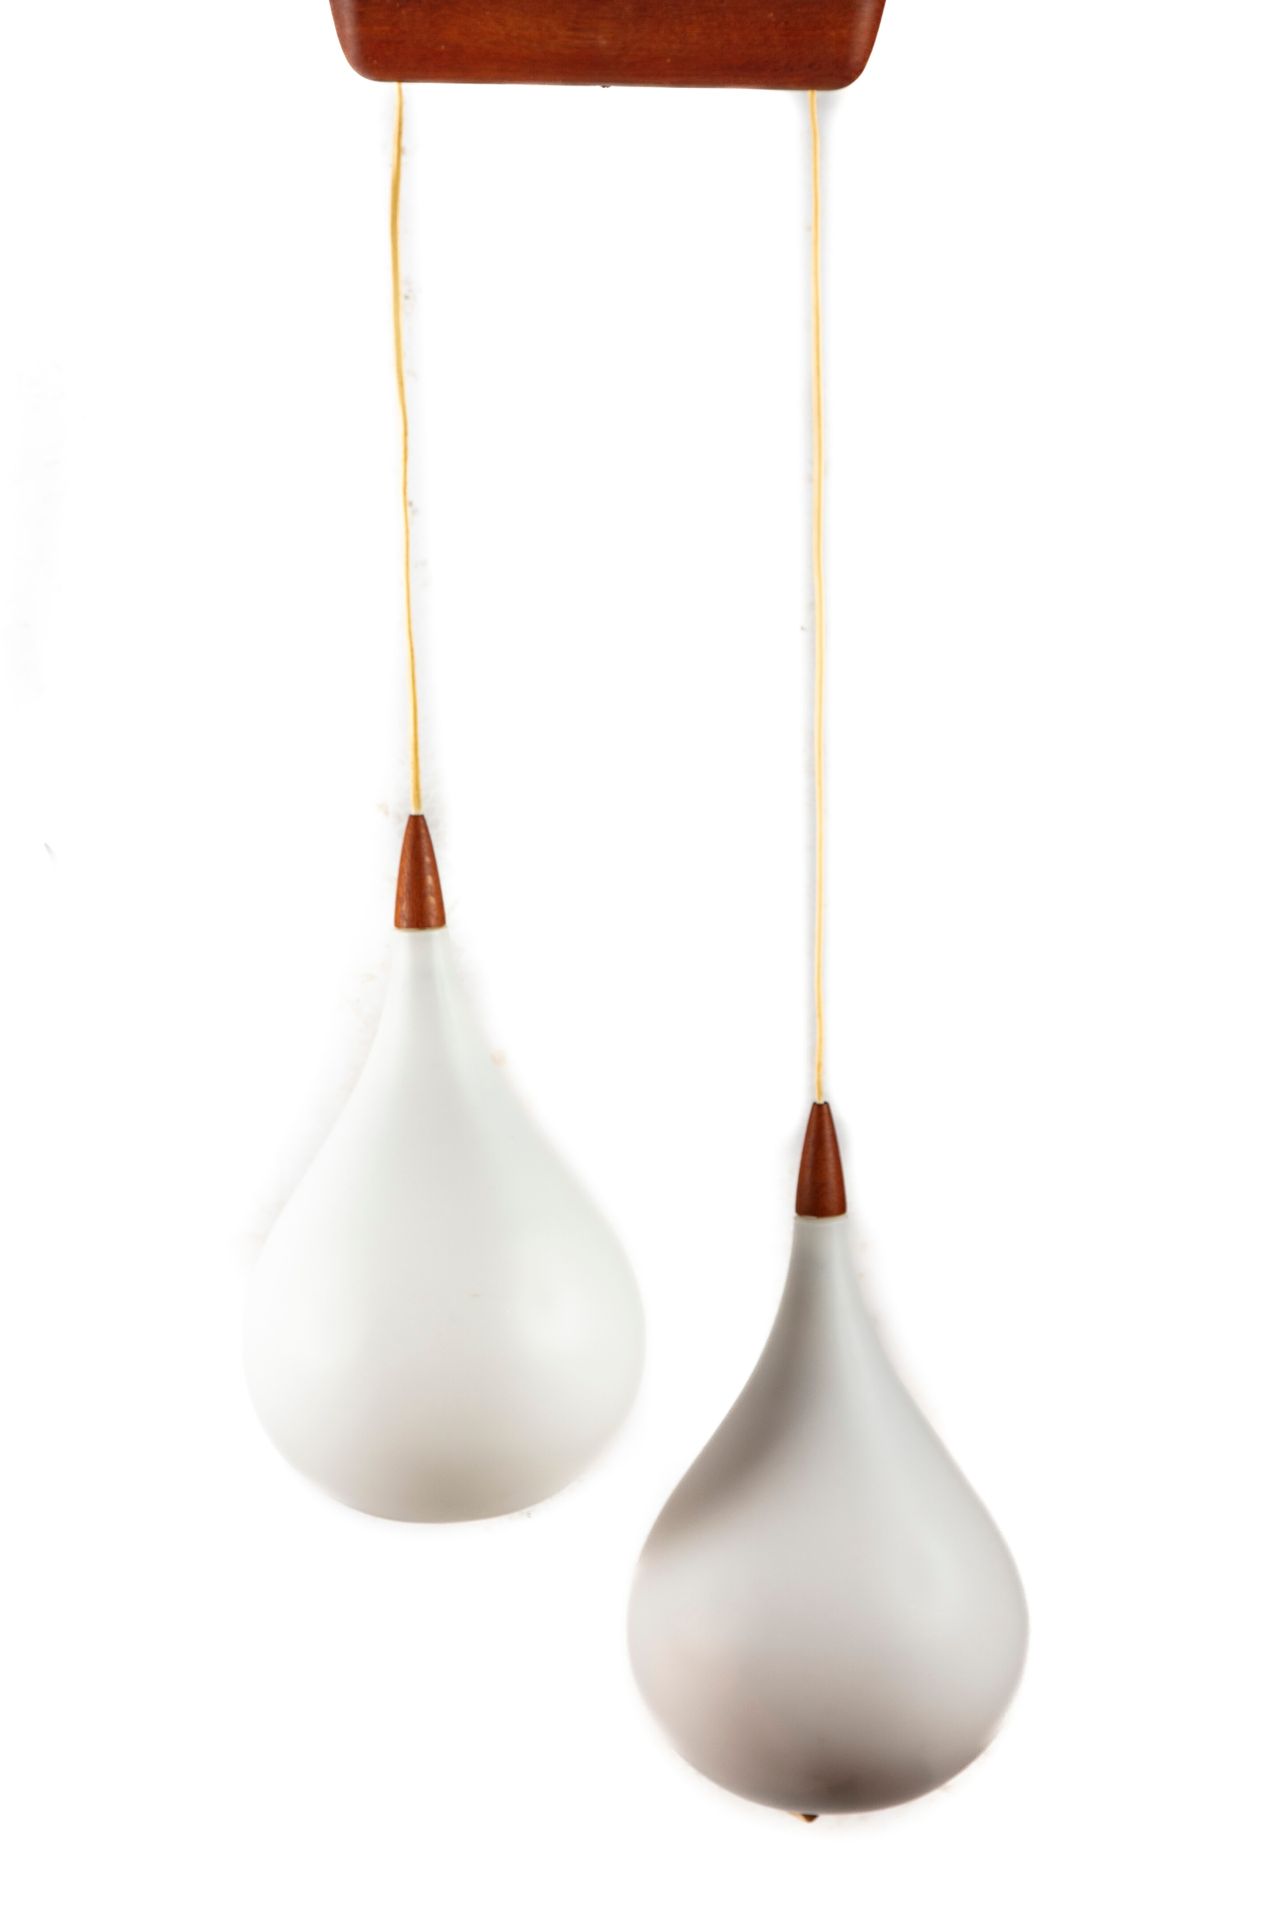 Null UNO & KRISTIANSSON for Luxus, Vittsjö
Drop lamp with two opaline shades in &hellip;